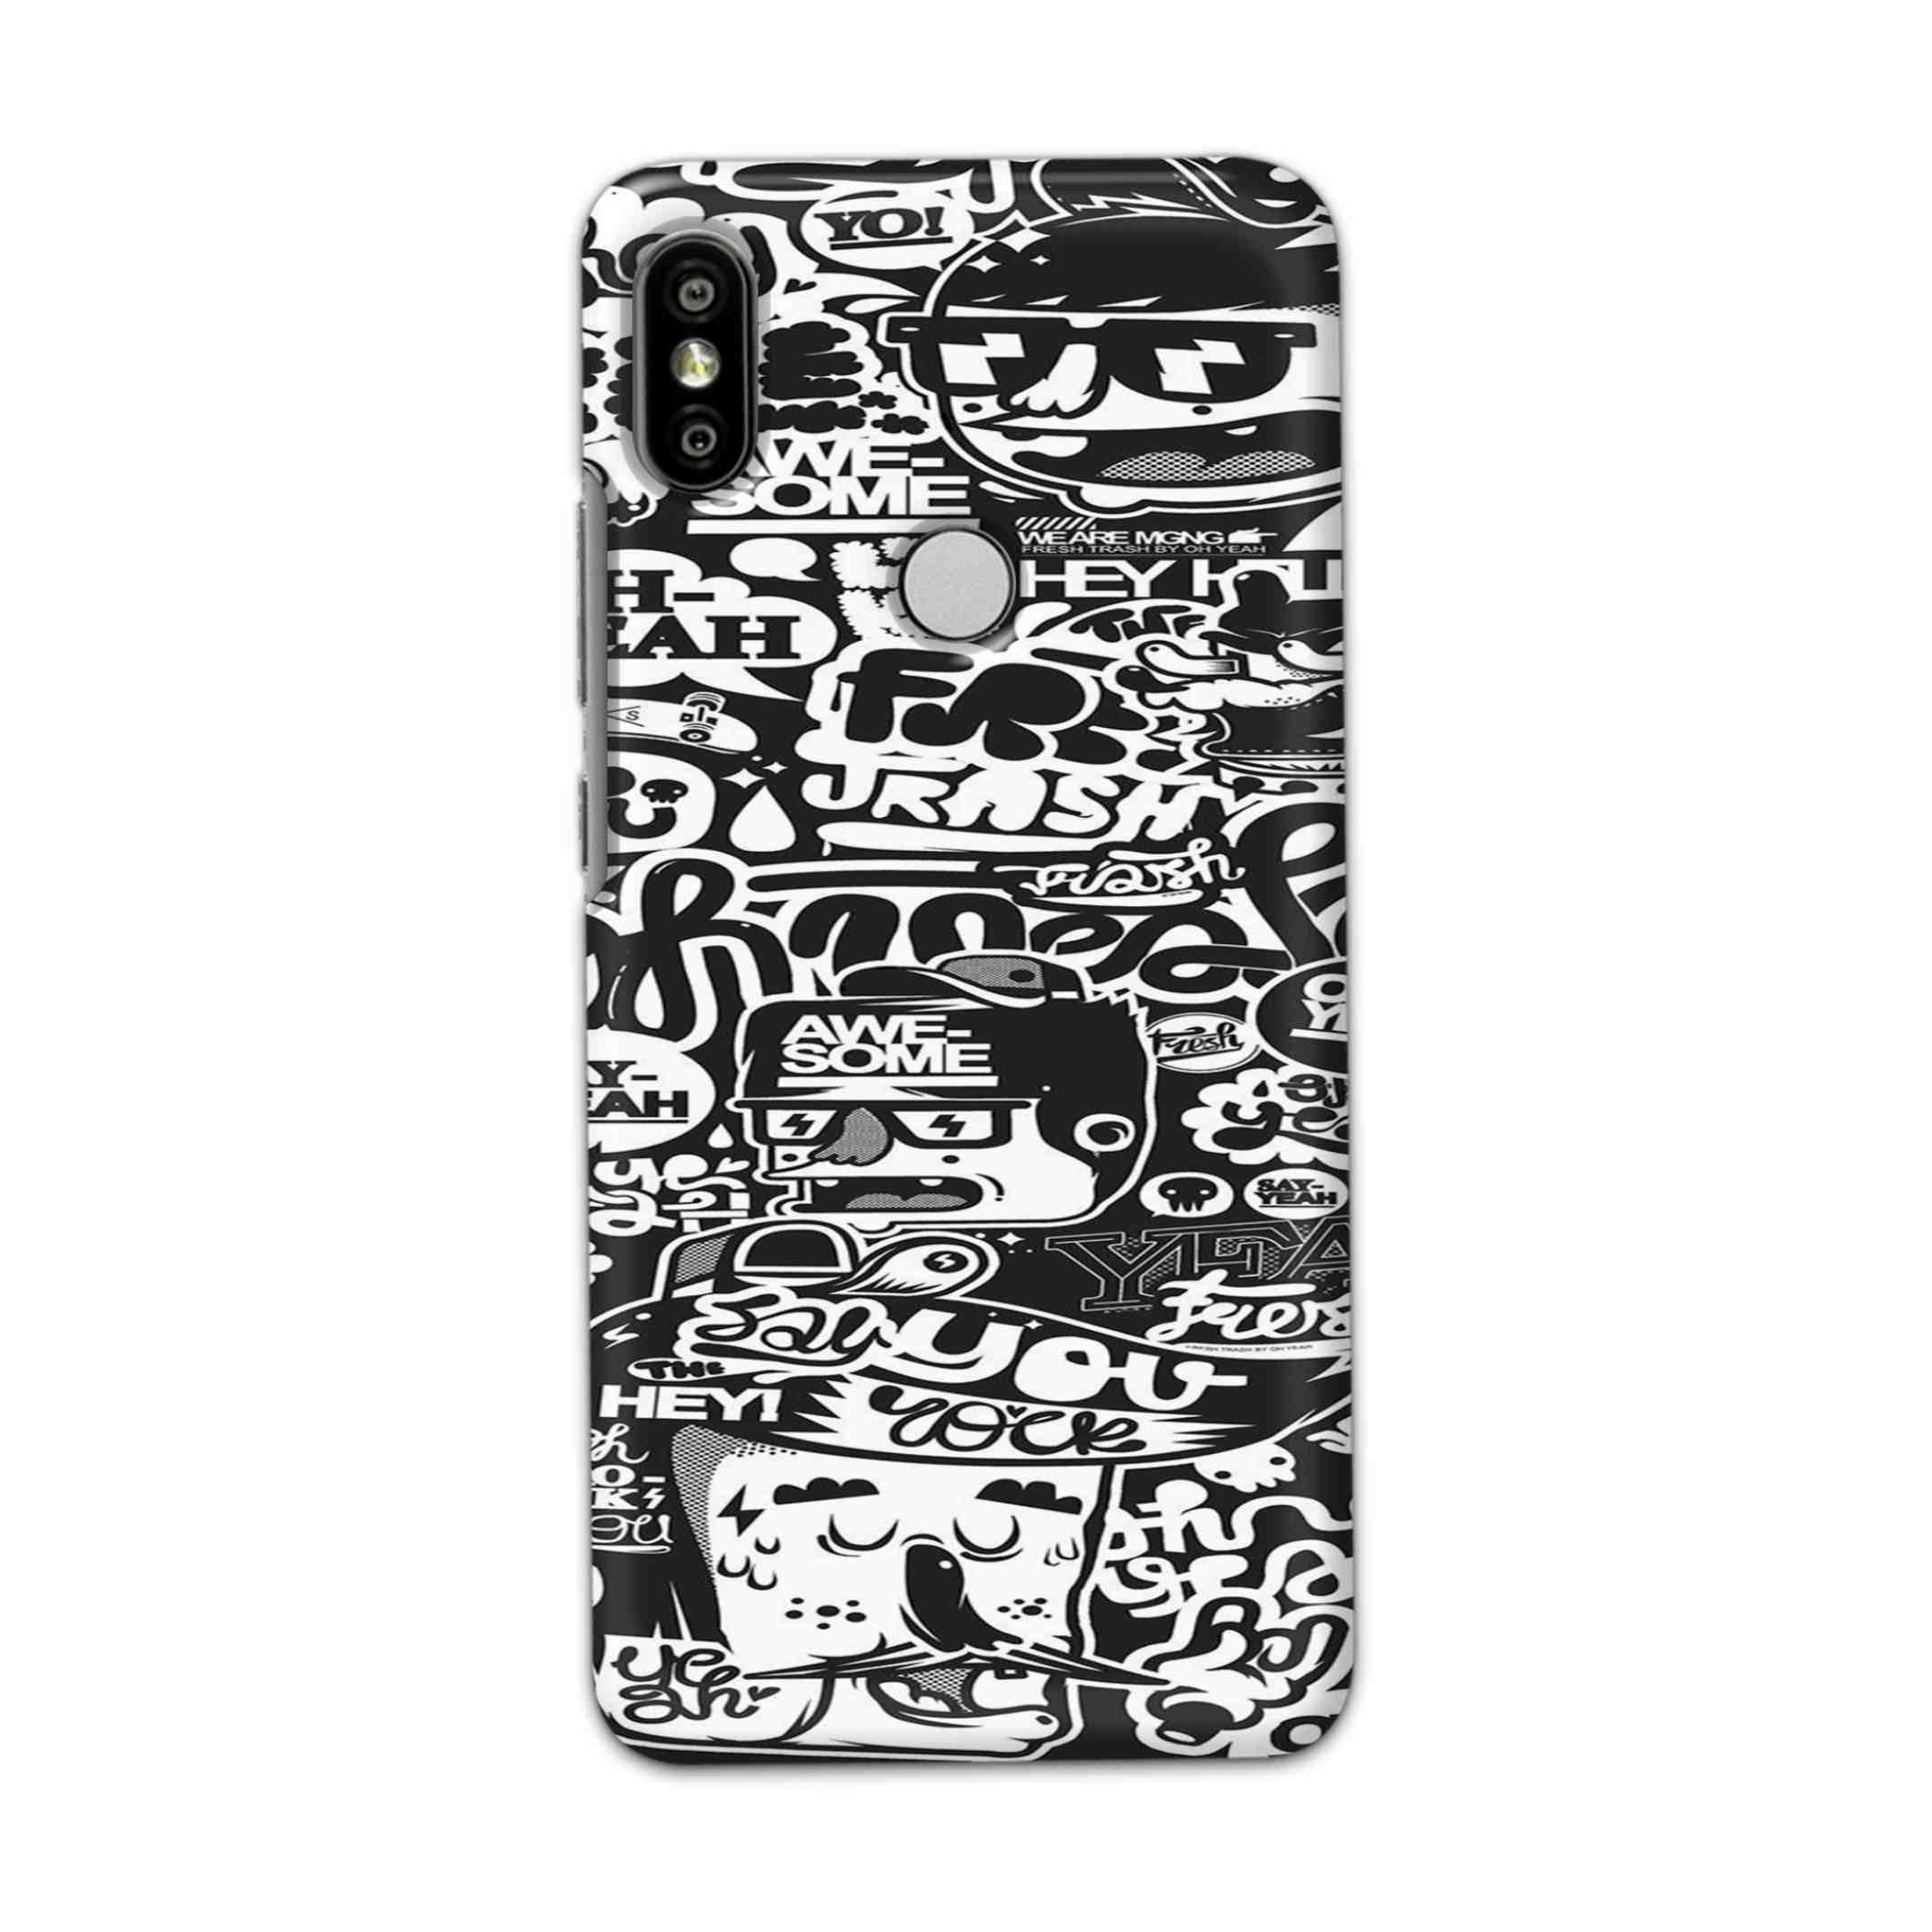 Buy Awesome Hard Back Mobile Phone Case Cover For Redmi S2 / Y2 Online